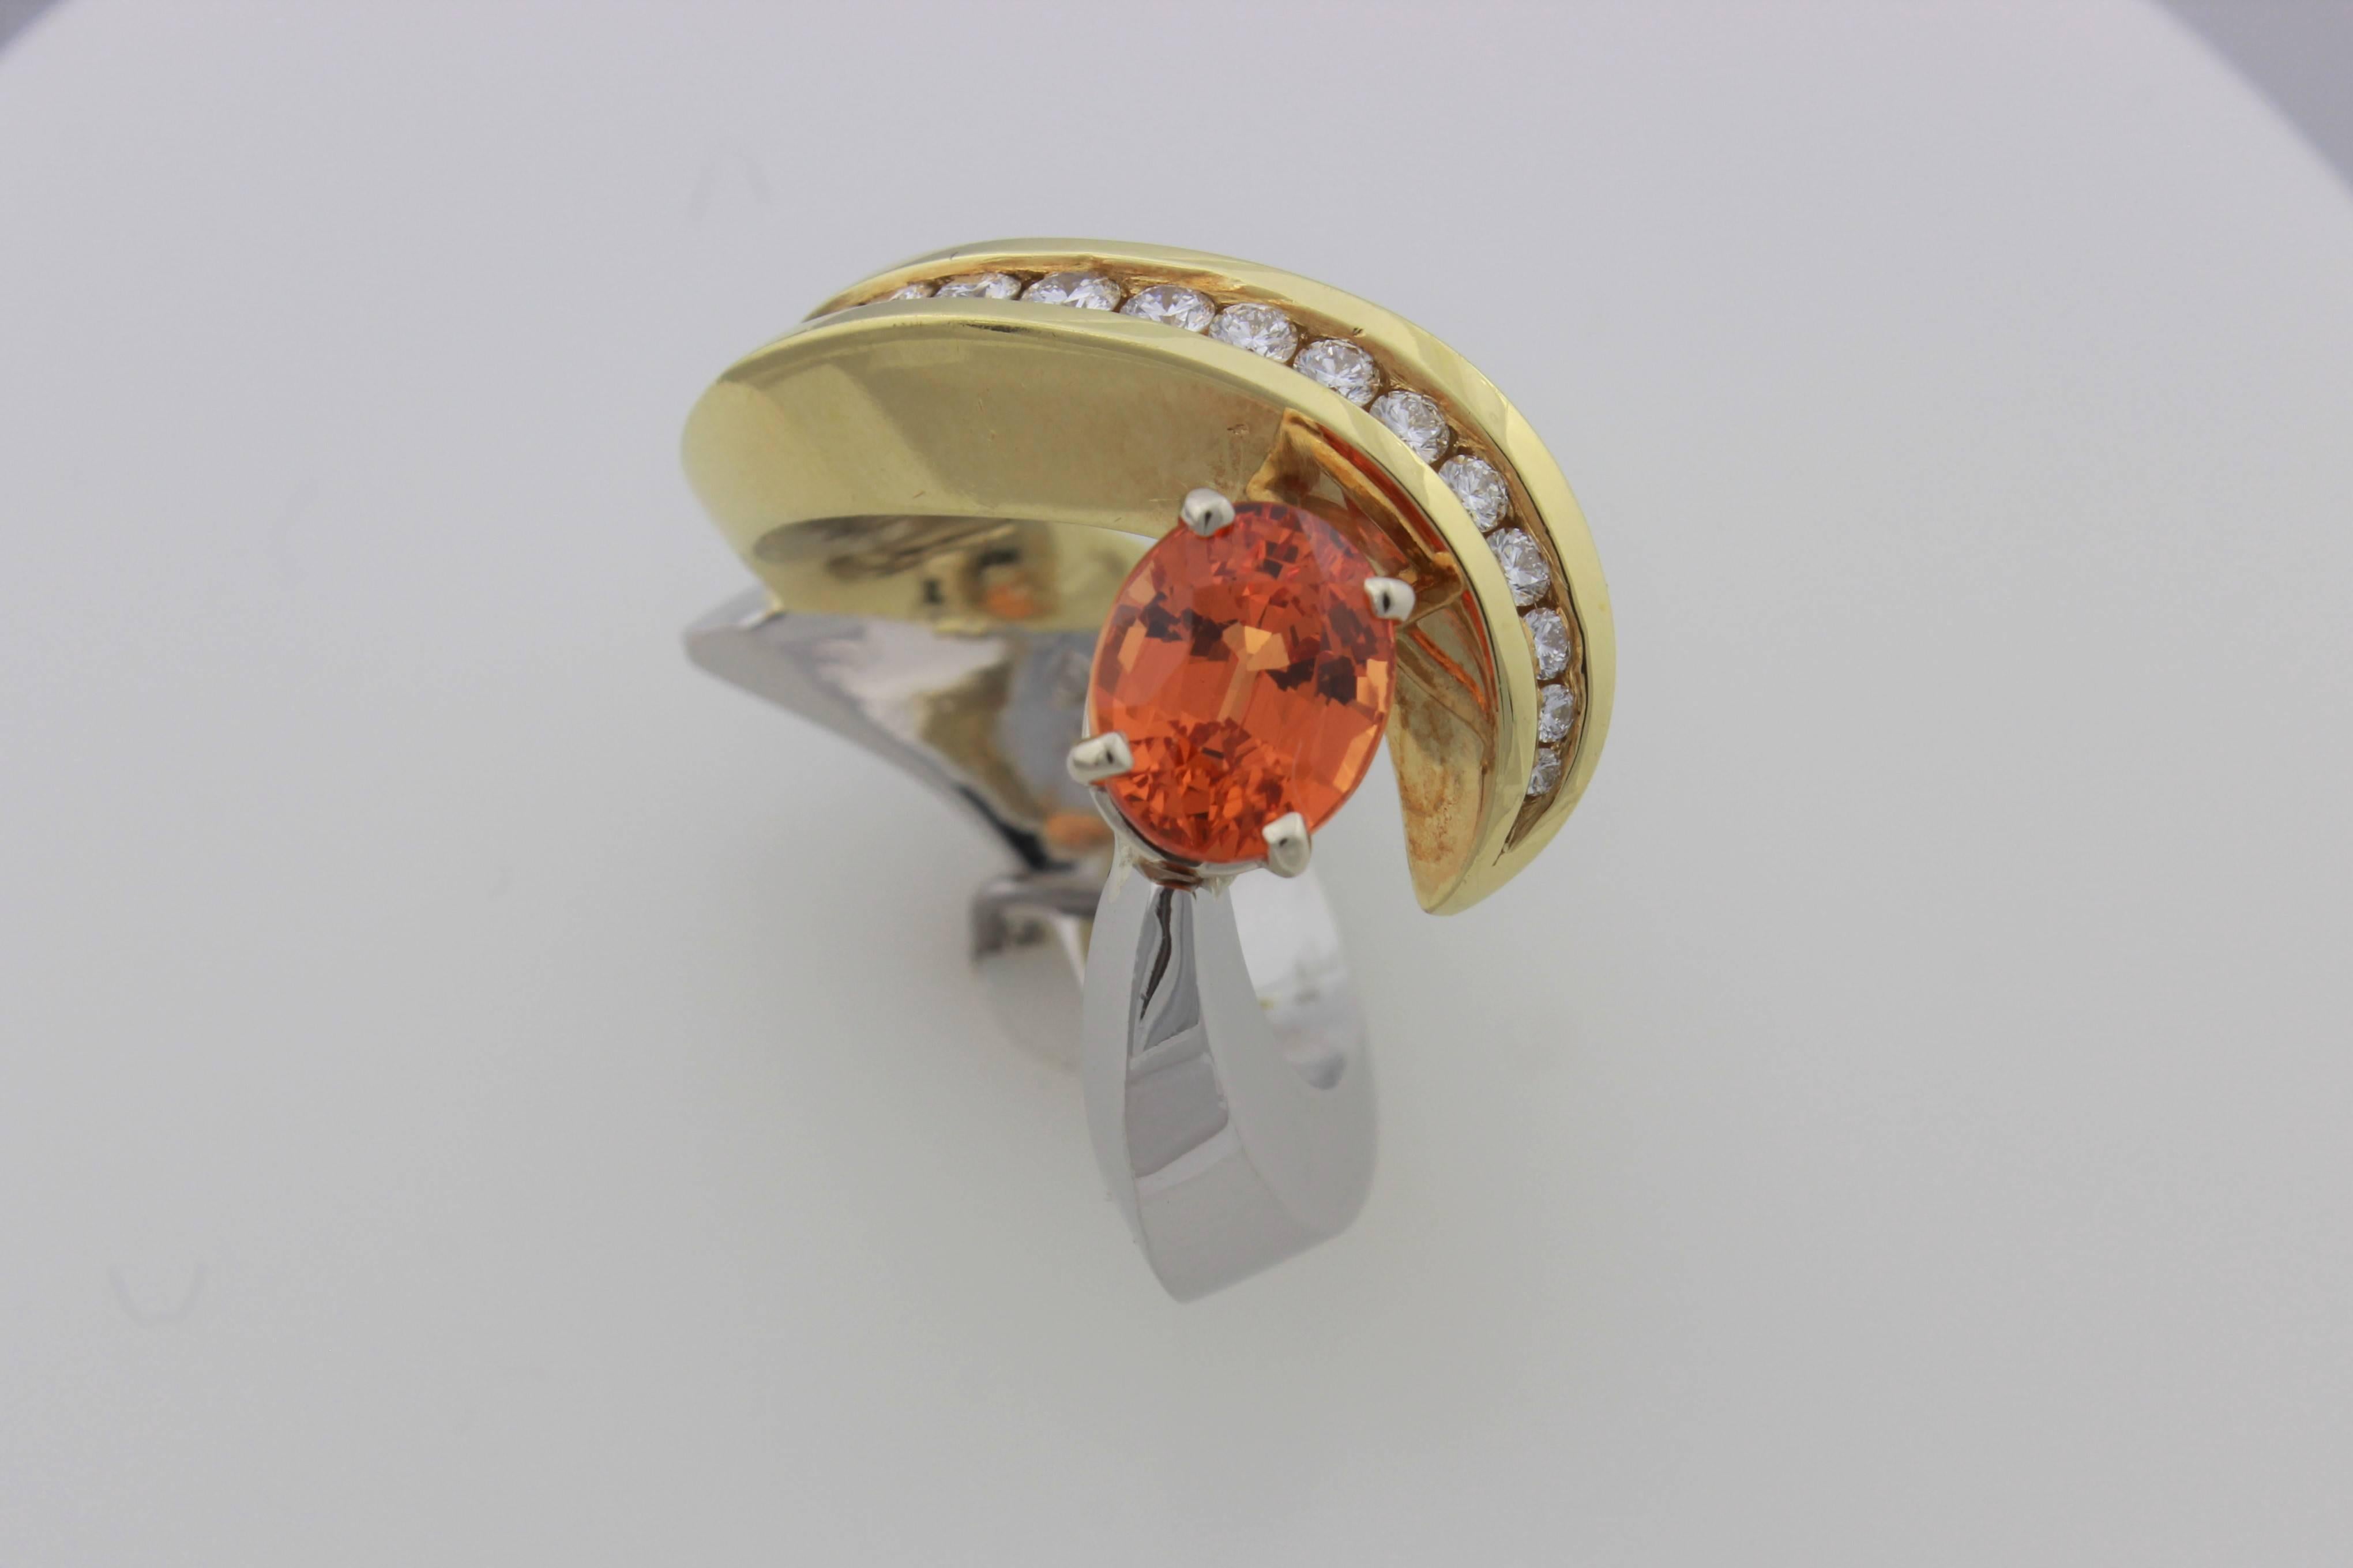 Eddie Sakamoto Designed Spessartite Garnet And Diamond Ring Set In Plat/18ktYG.  This sculpture of a ring contains a 2.17 carat oval Spessartite Garnet and 21 diamonds totaling .44 carats.  Finger size is 5.5, it is sizeable but tricky.